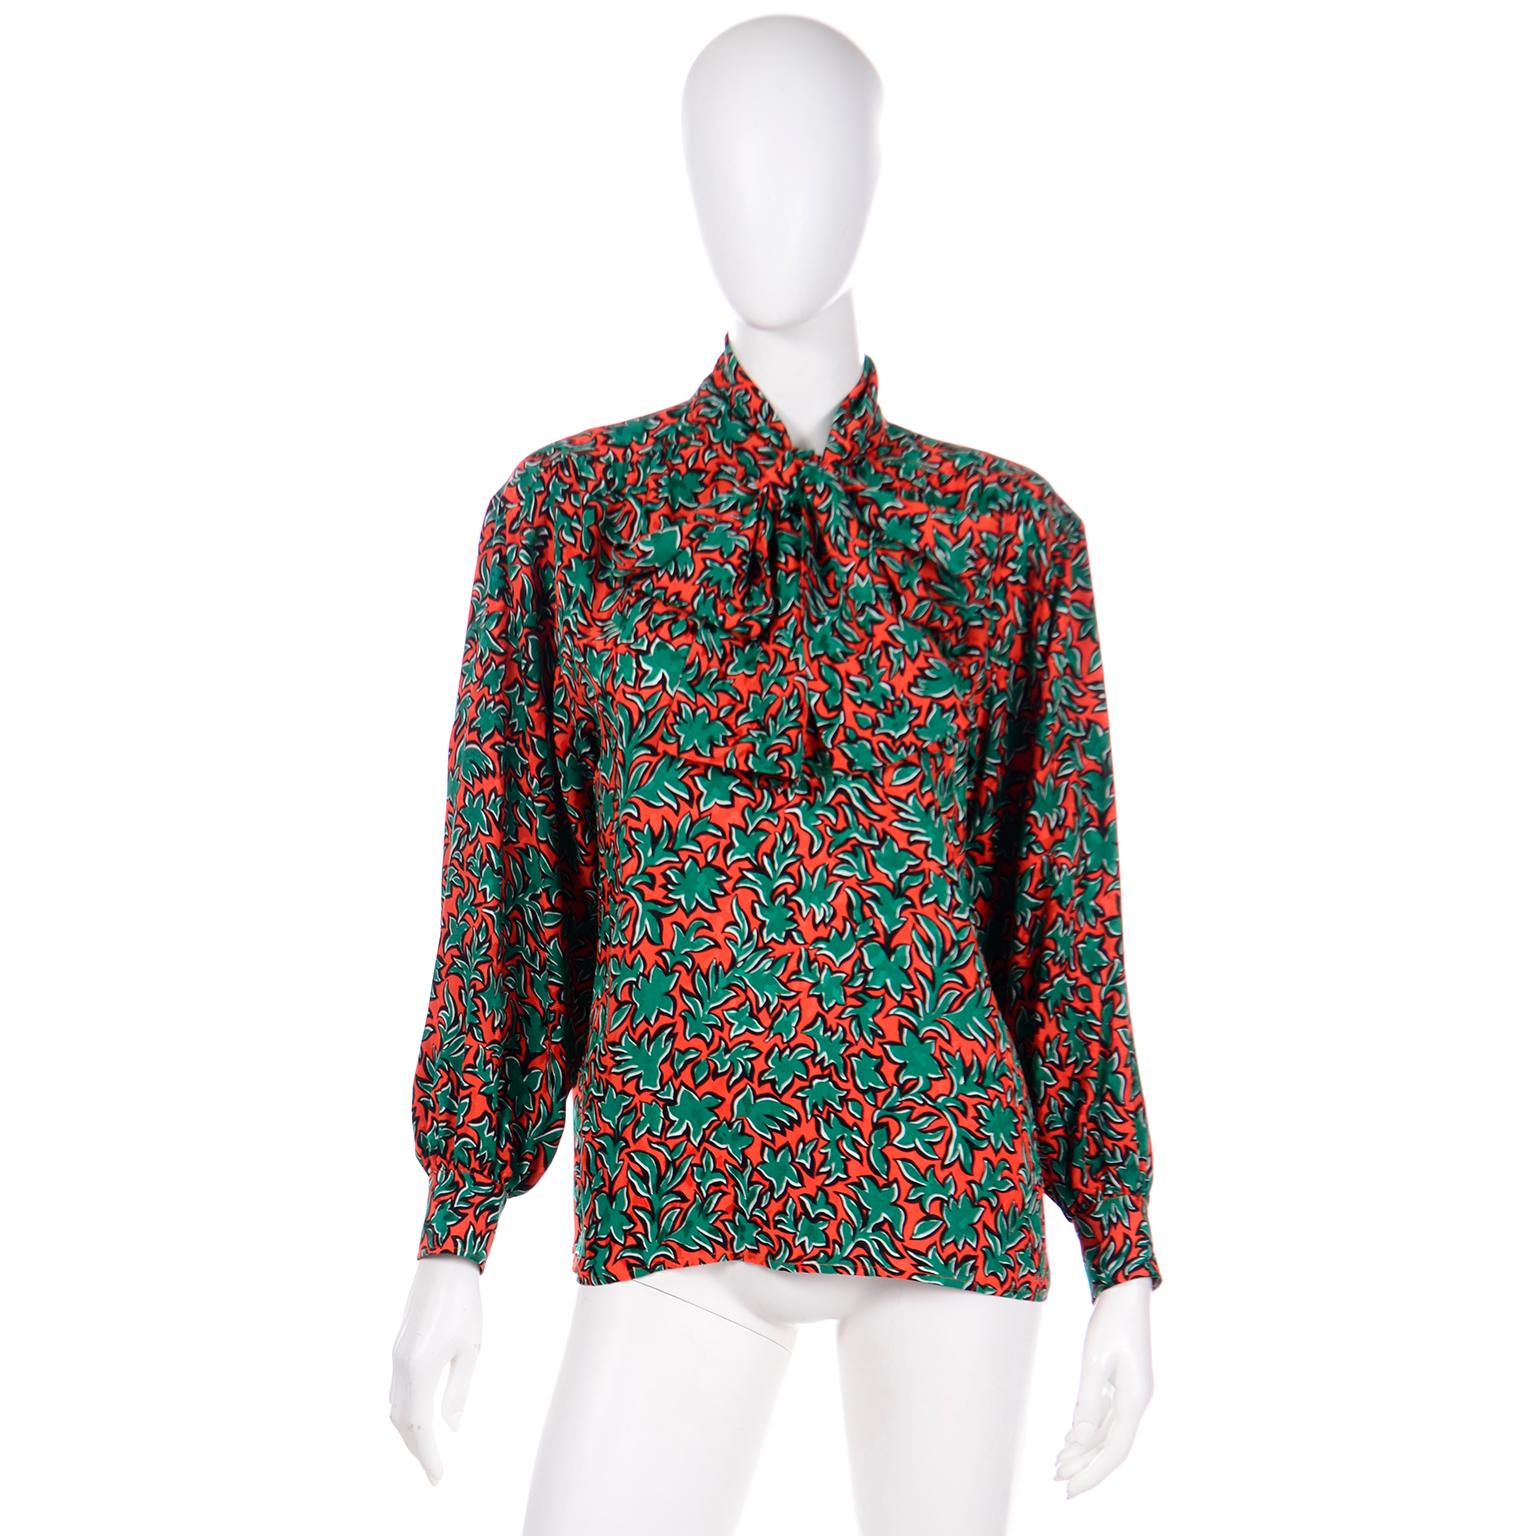 This is a vintage Yves Saint Laurent silk blouse in a bold botanical leaf print in shades of orange and green. This great YSL top has a neck sash that can be tied in a variety of ways, bearing the same orange and green pop art leaf print. The long